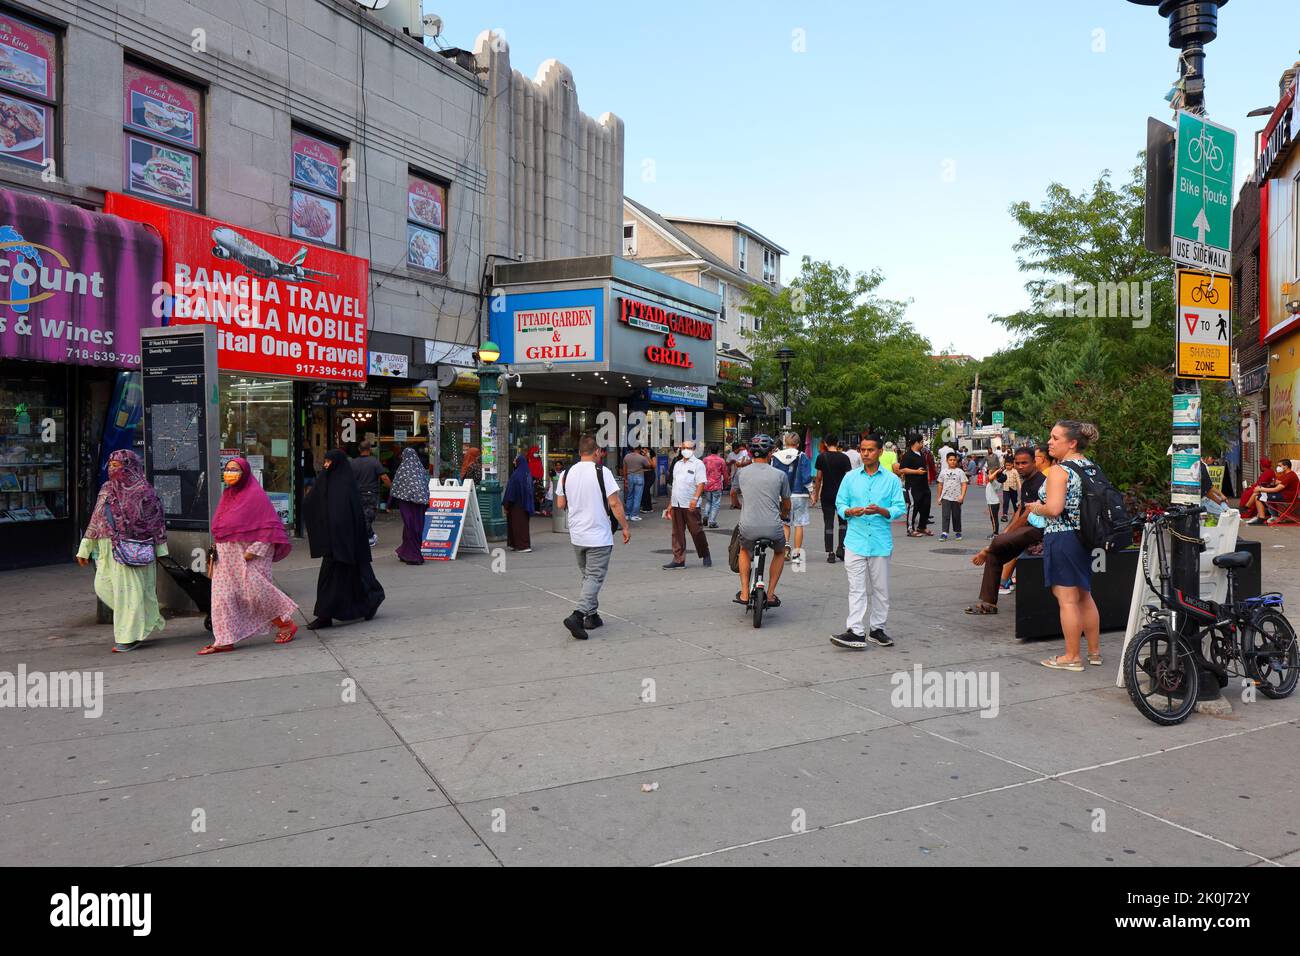 People, shoppers at Diversity Plaza, a pedestrian plaza located at 37th Rd between 73rd and 74th Sts, Jackson Heights, Queens, New York, August 30, 20 Stock Photo